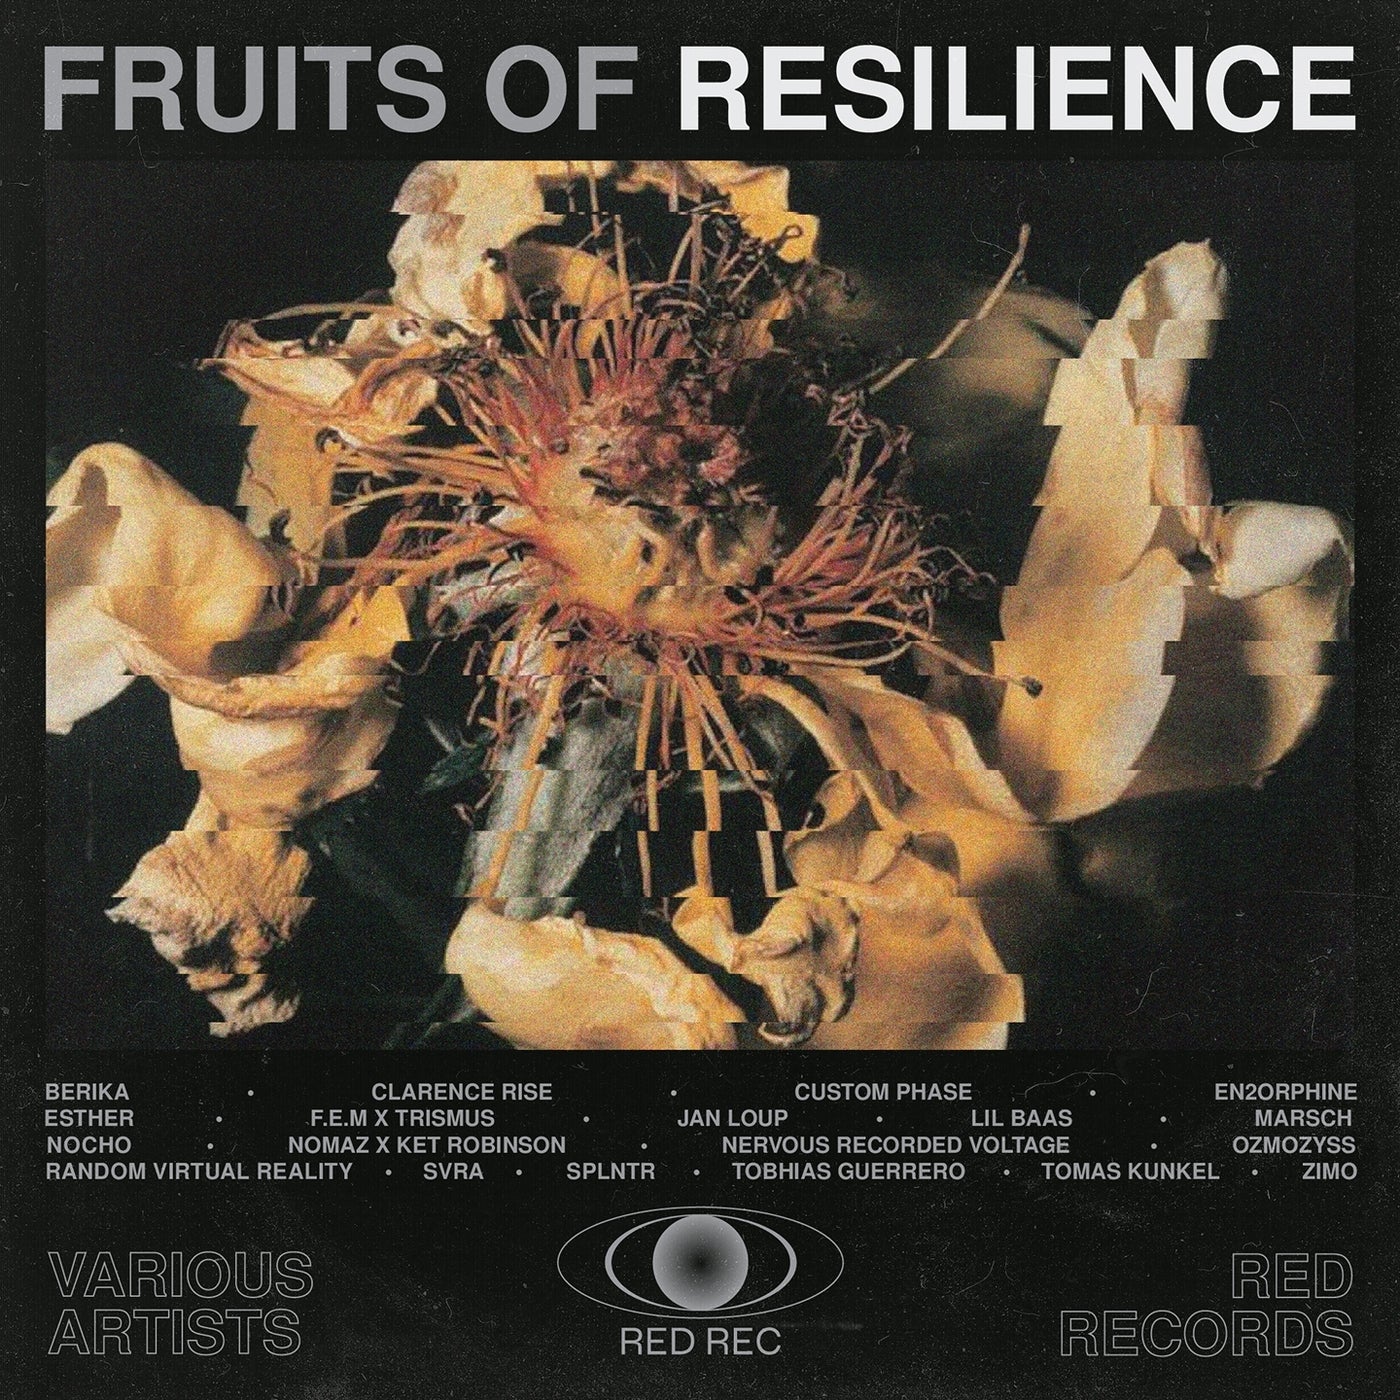 Fruits of Resilience